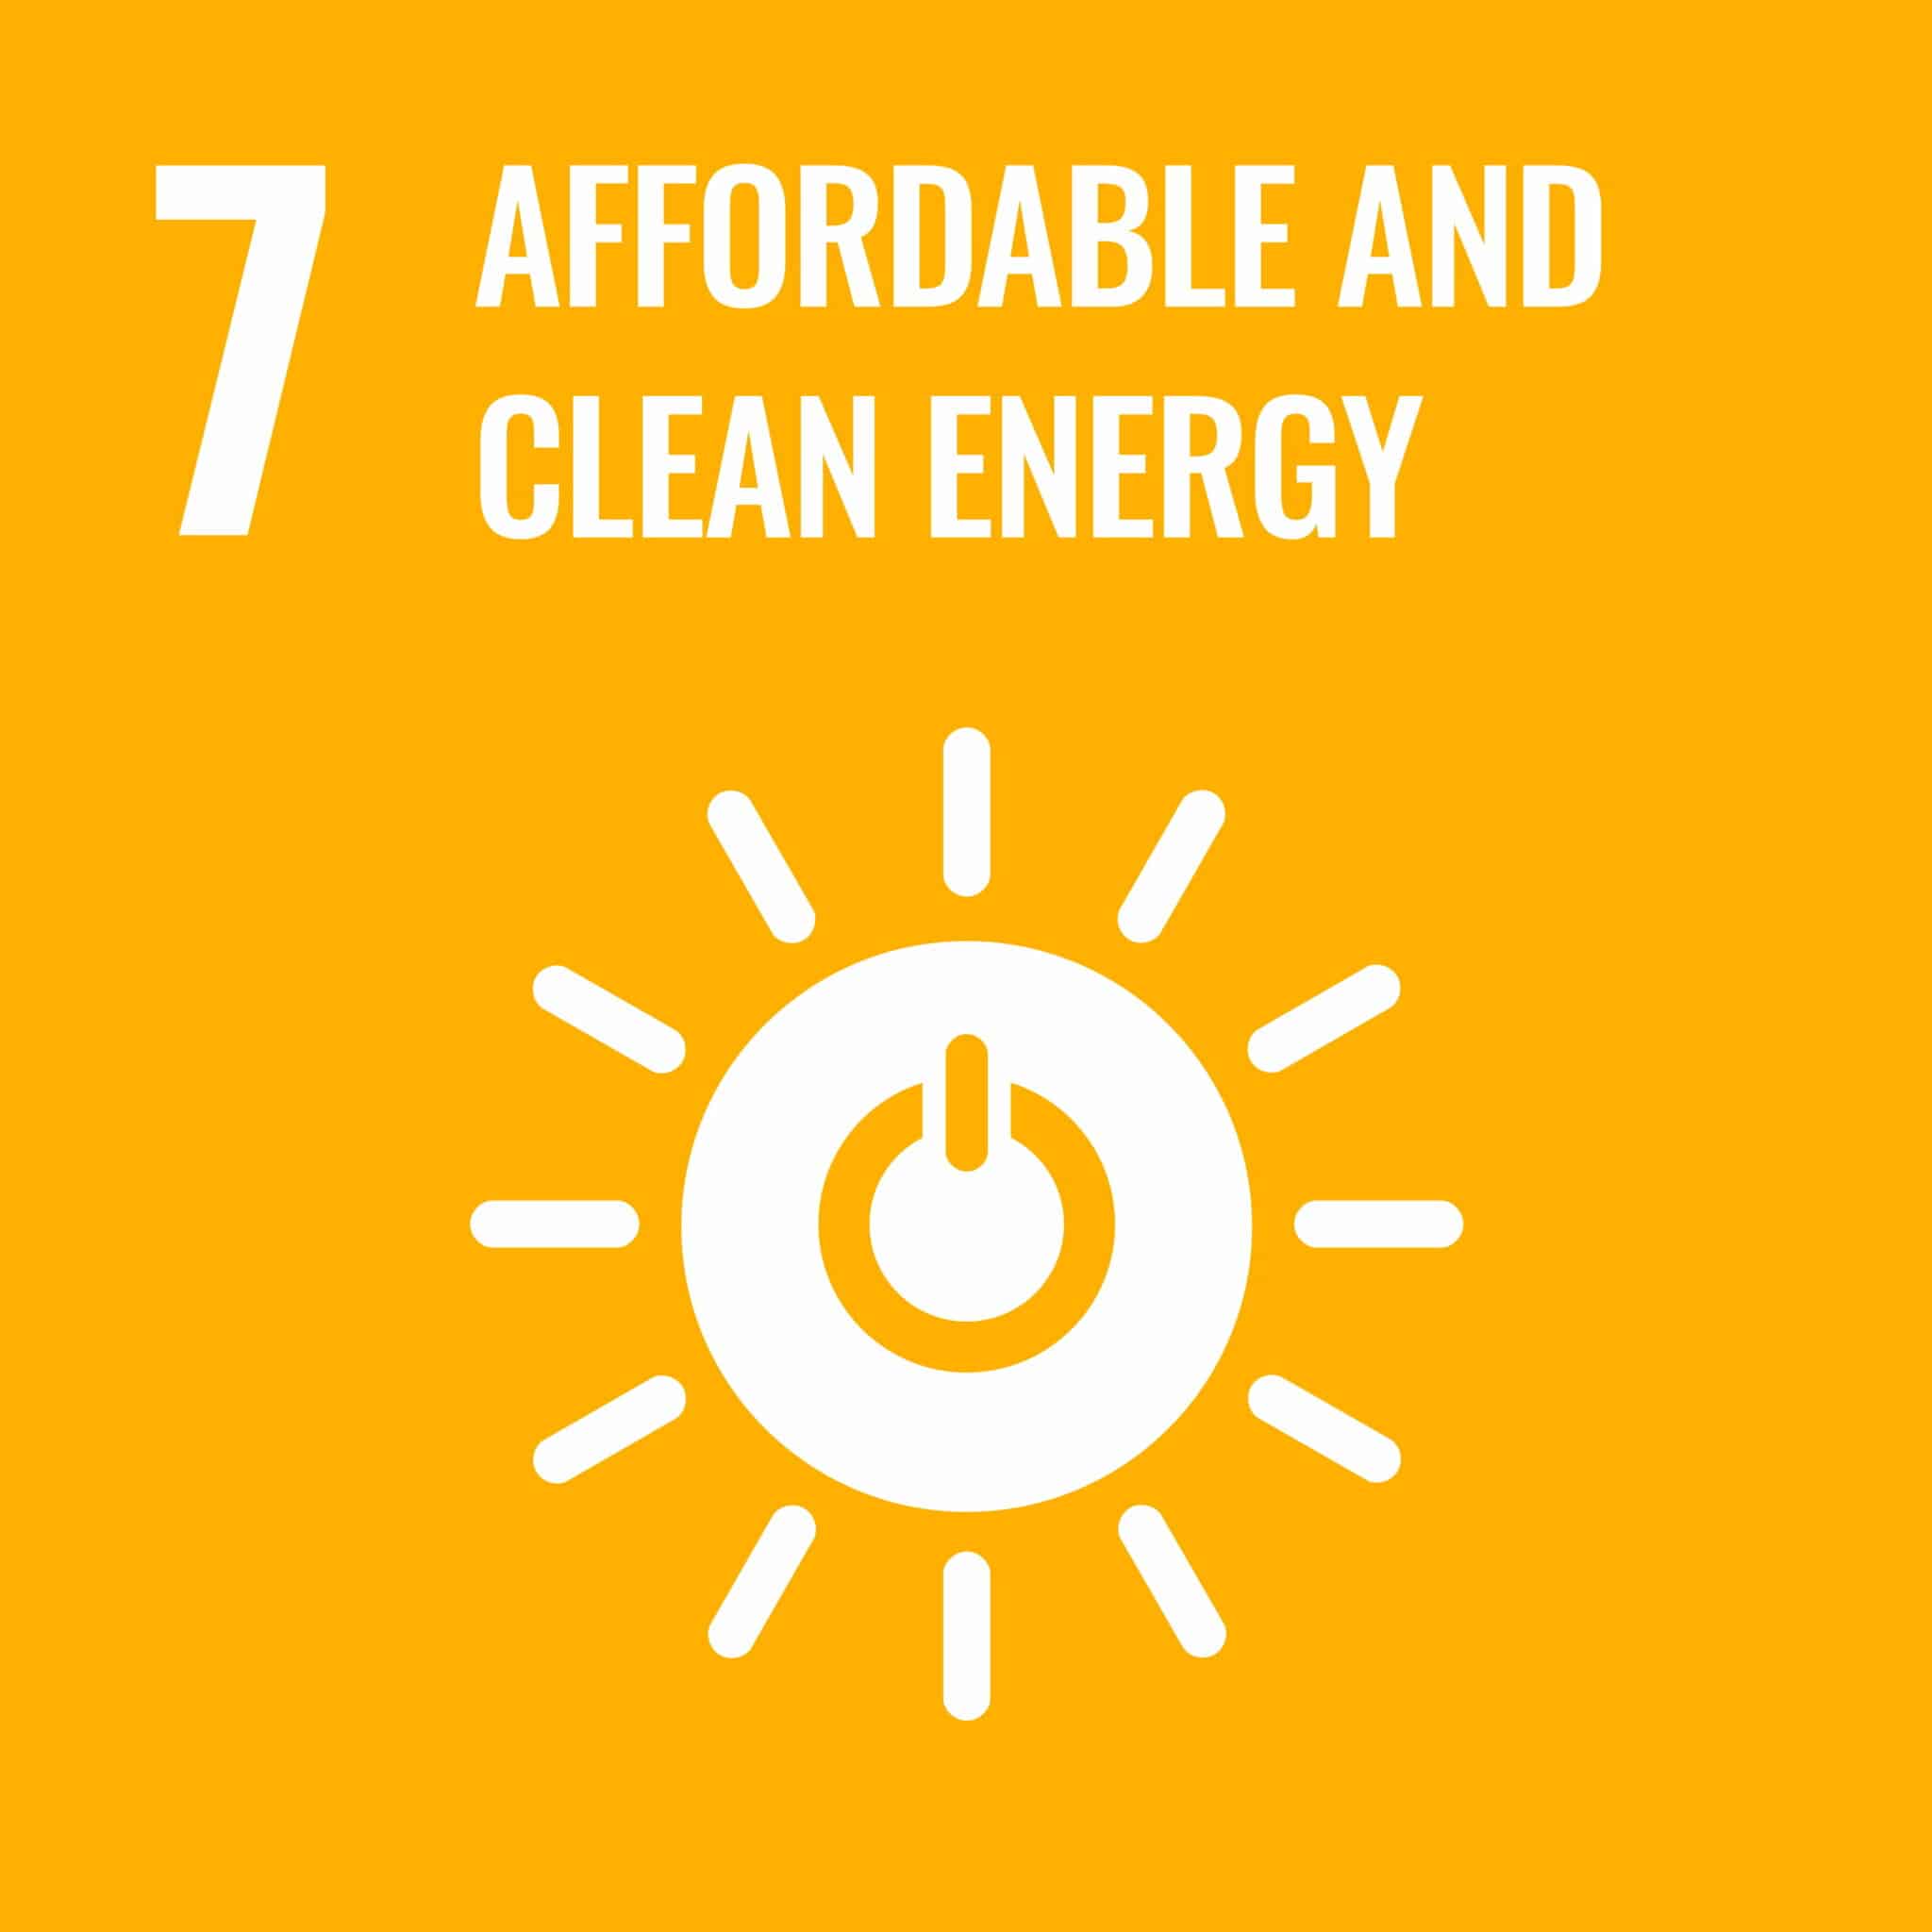 7-Affordable and Clean Energy